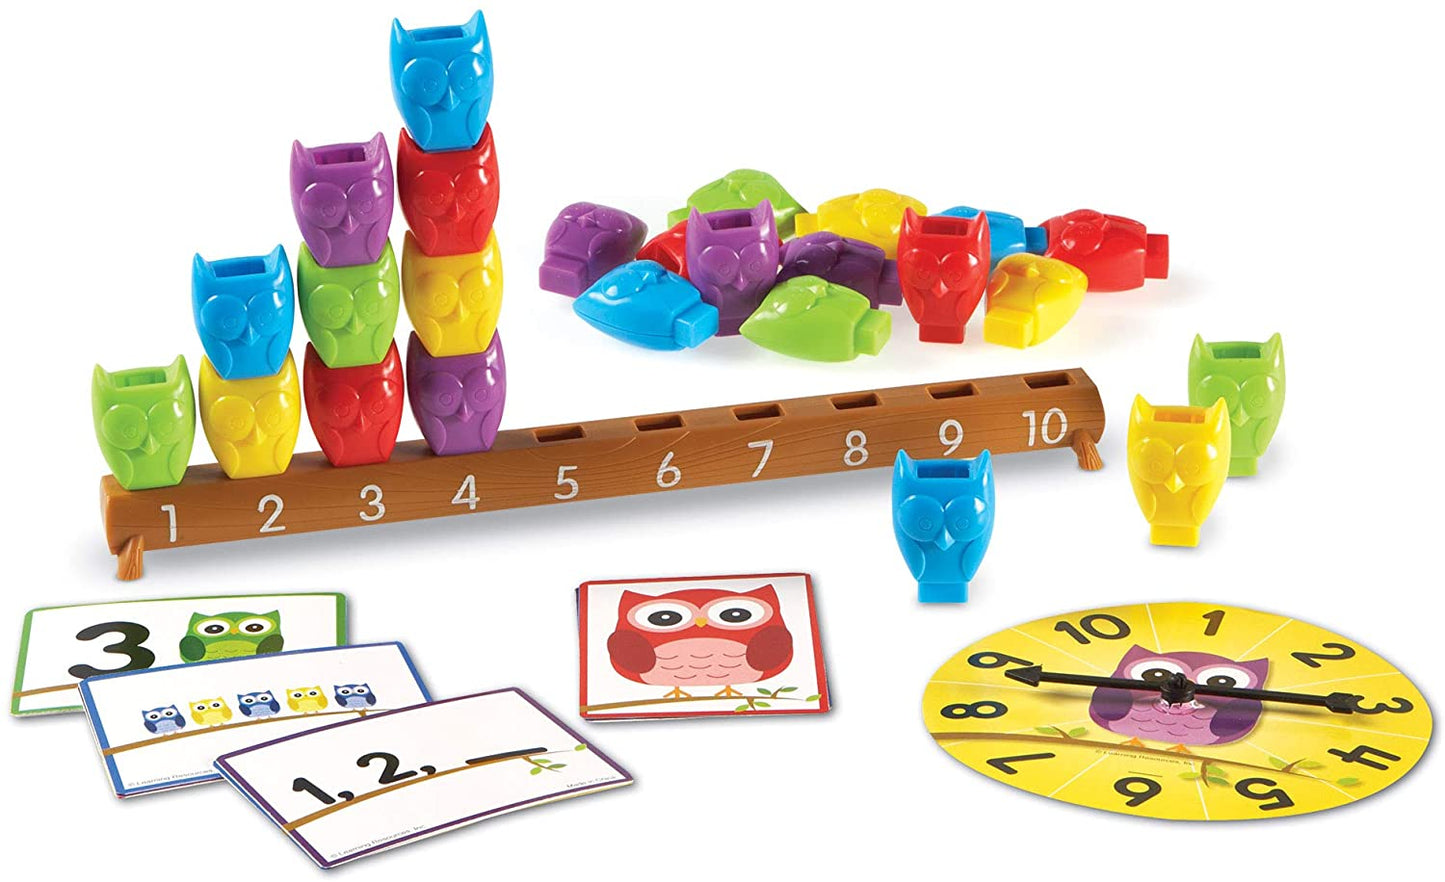 1-10 County Owls Activity Set | One to One Correspondence Game